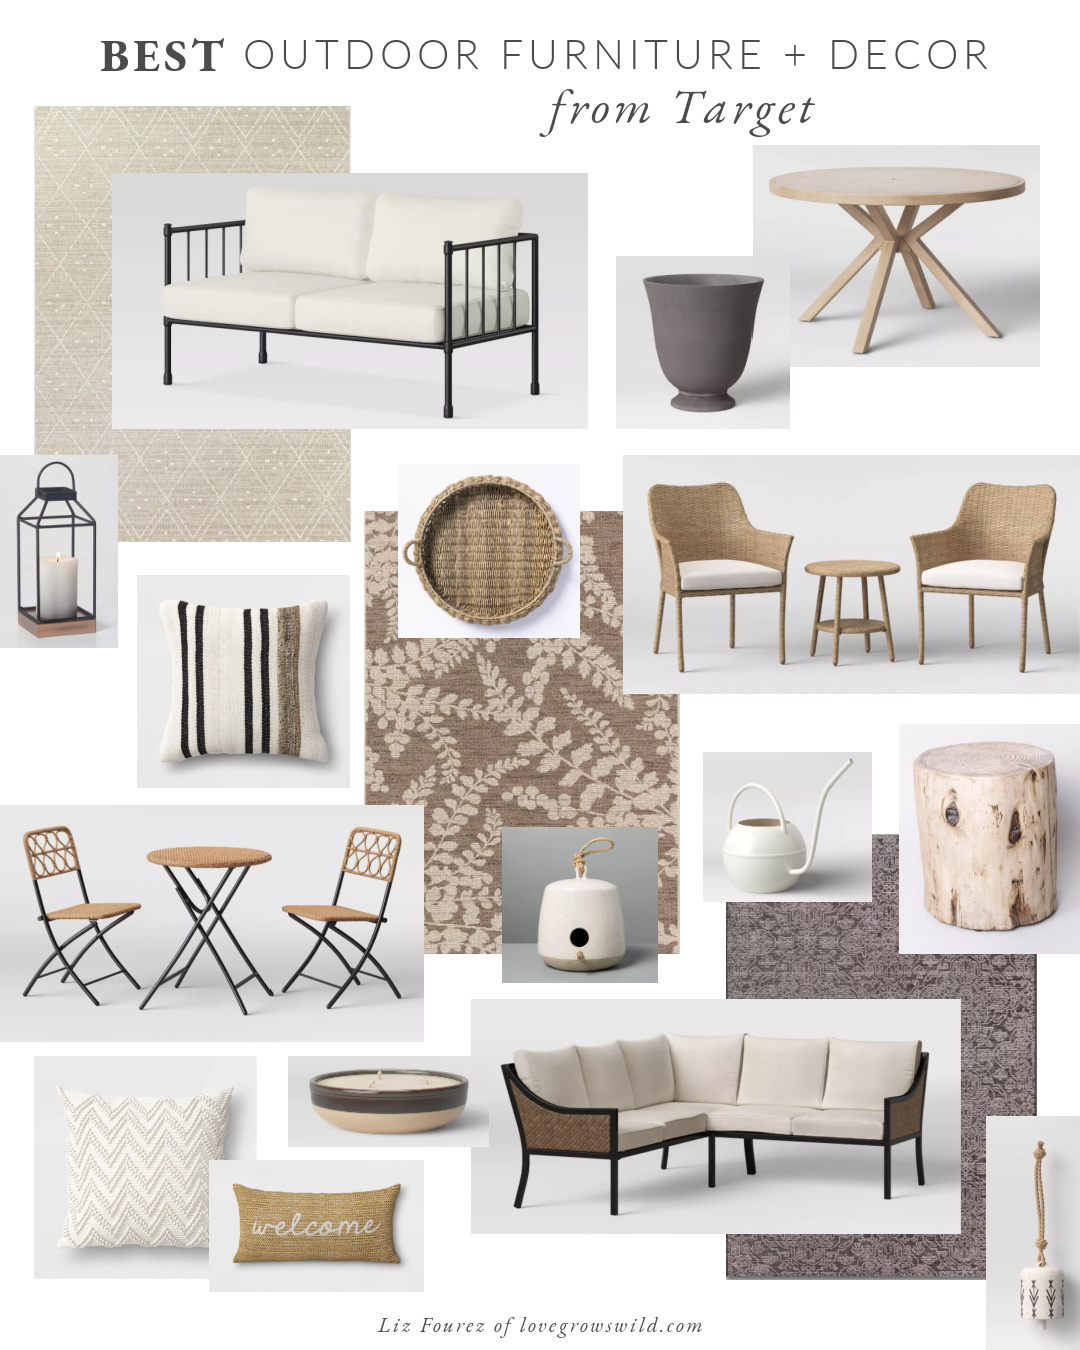 Home blogger and interior decorator Liz Fourez shares her favorite finds for outdoor furniture and decor